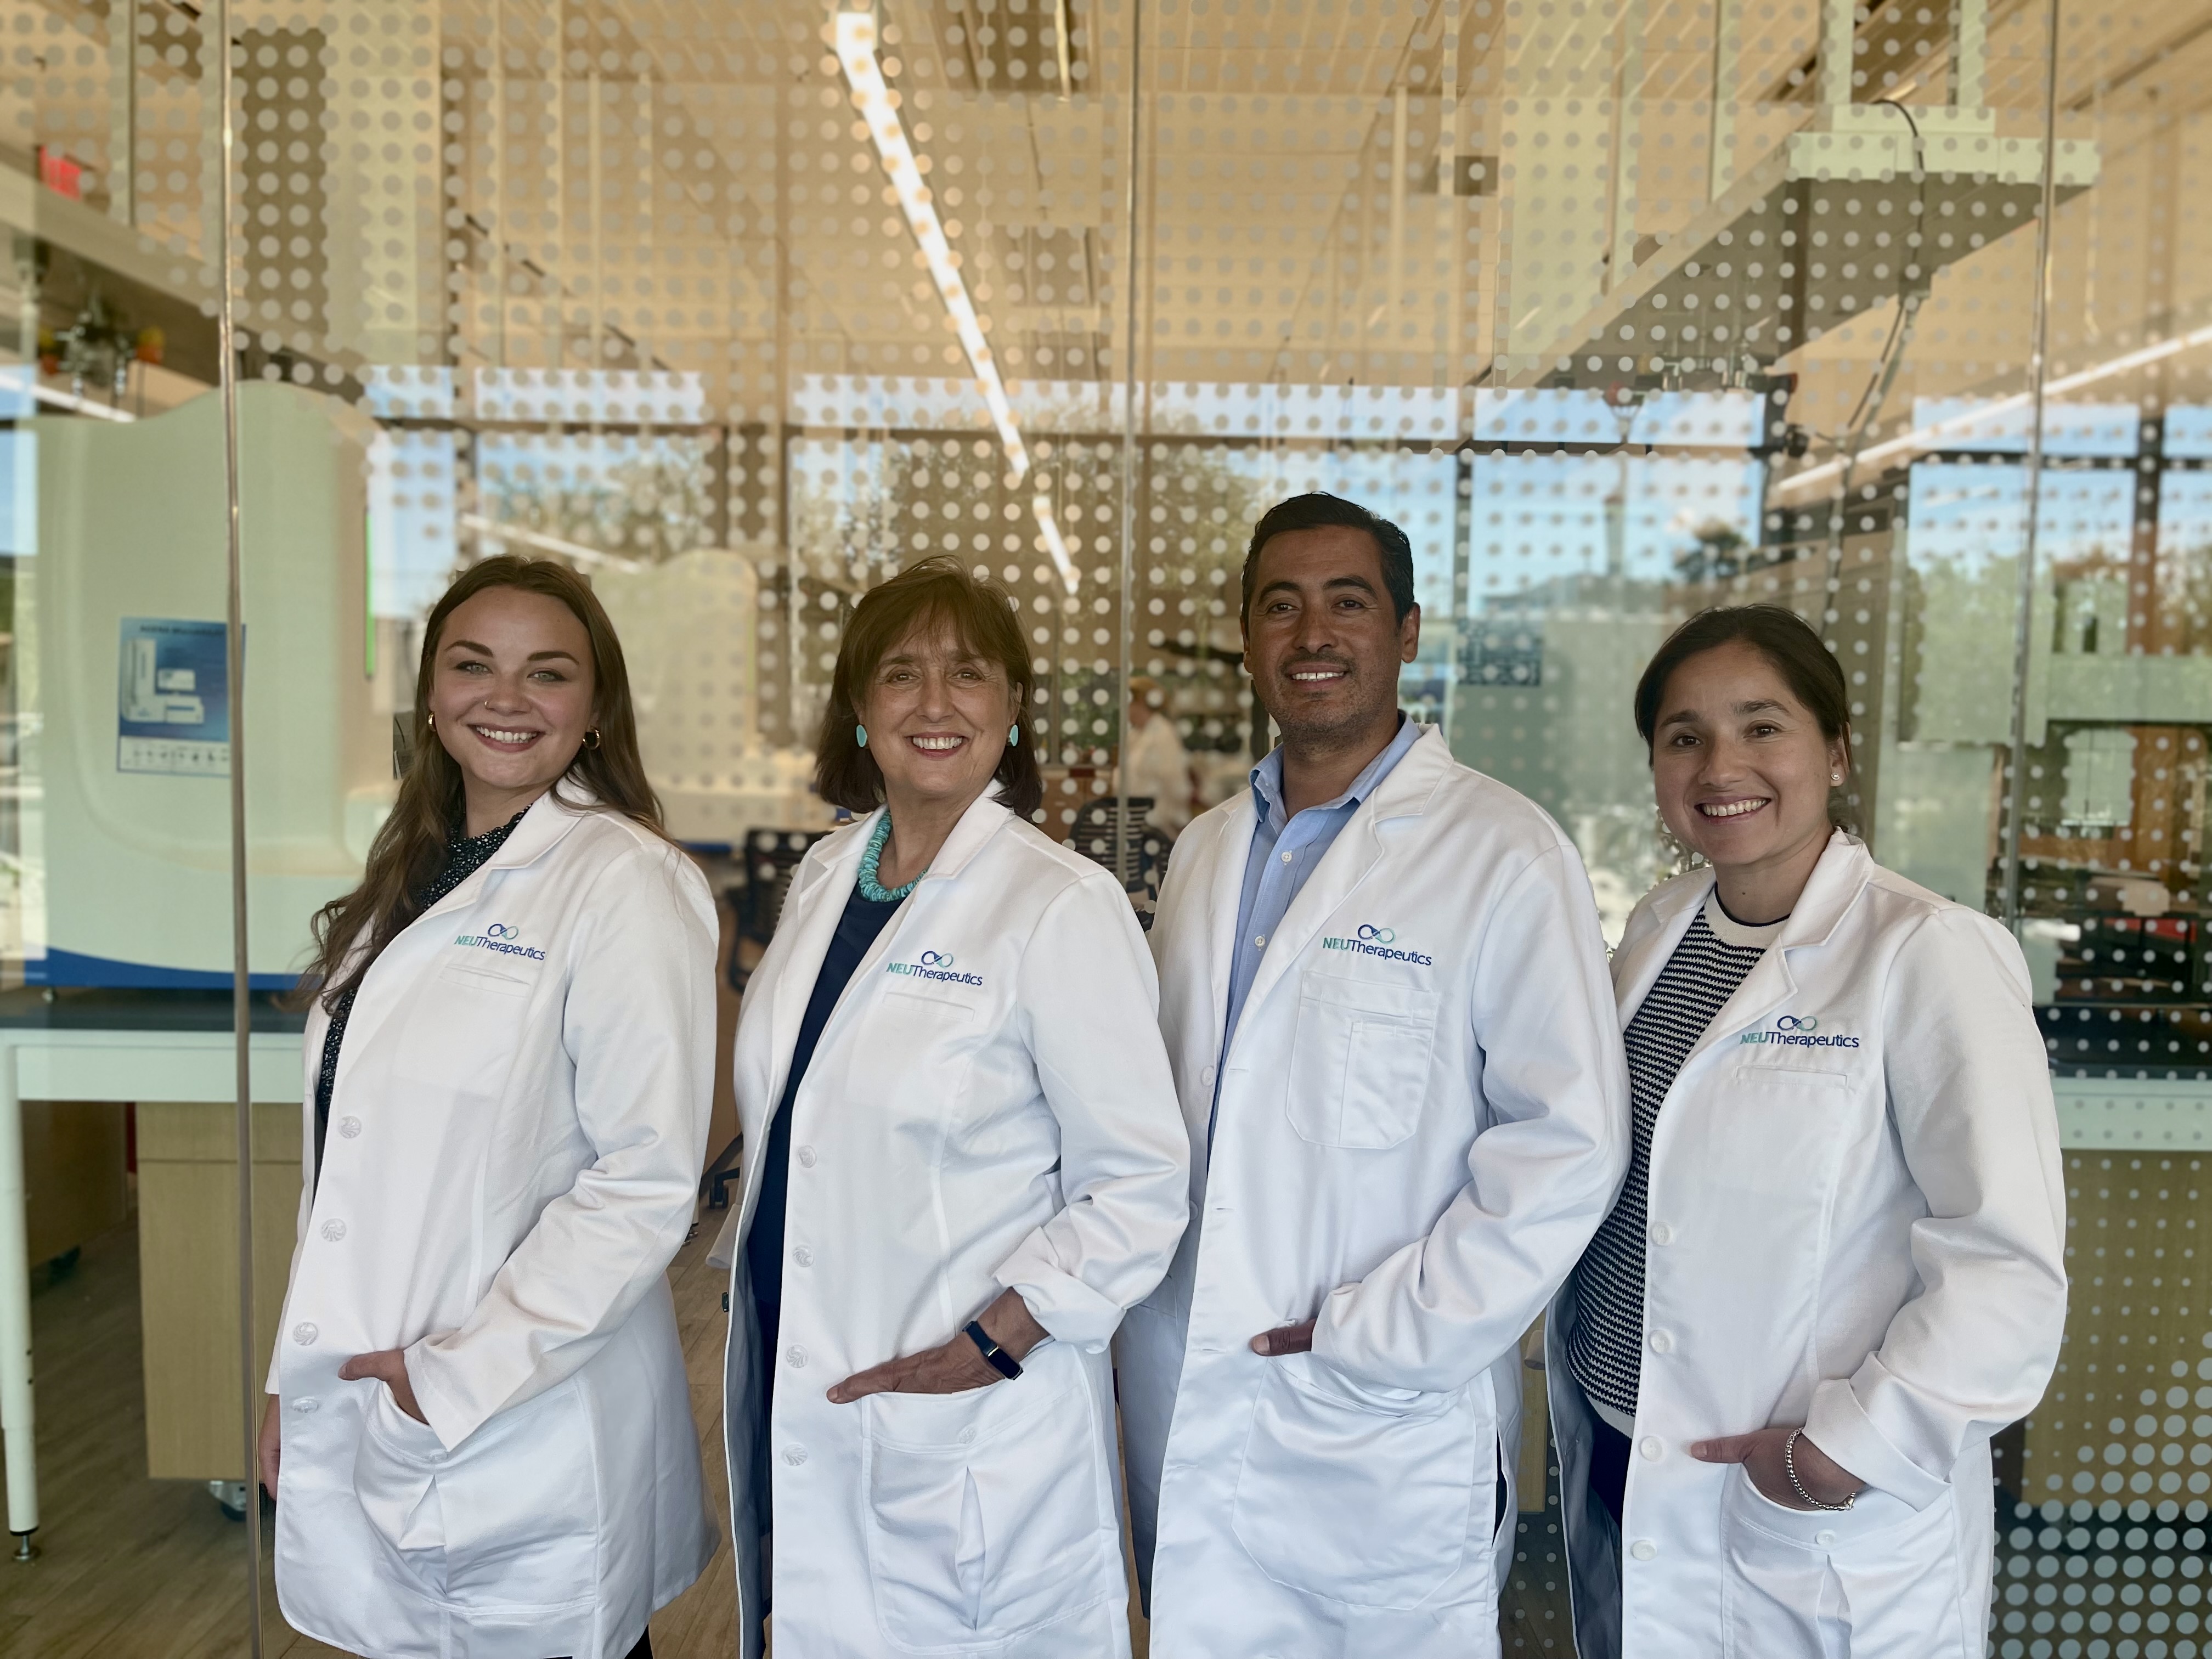 The HF Relief Clinical Trial Team (from left to right): Madison Chiodi, Dr. Roberta Brinton of Neutherapeutics and Dr. Gerson Hernandez and Claudia Lopez of the University of Arizona